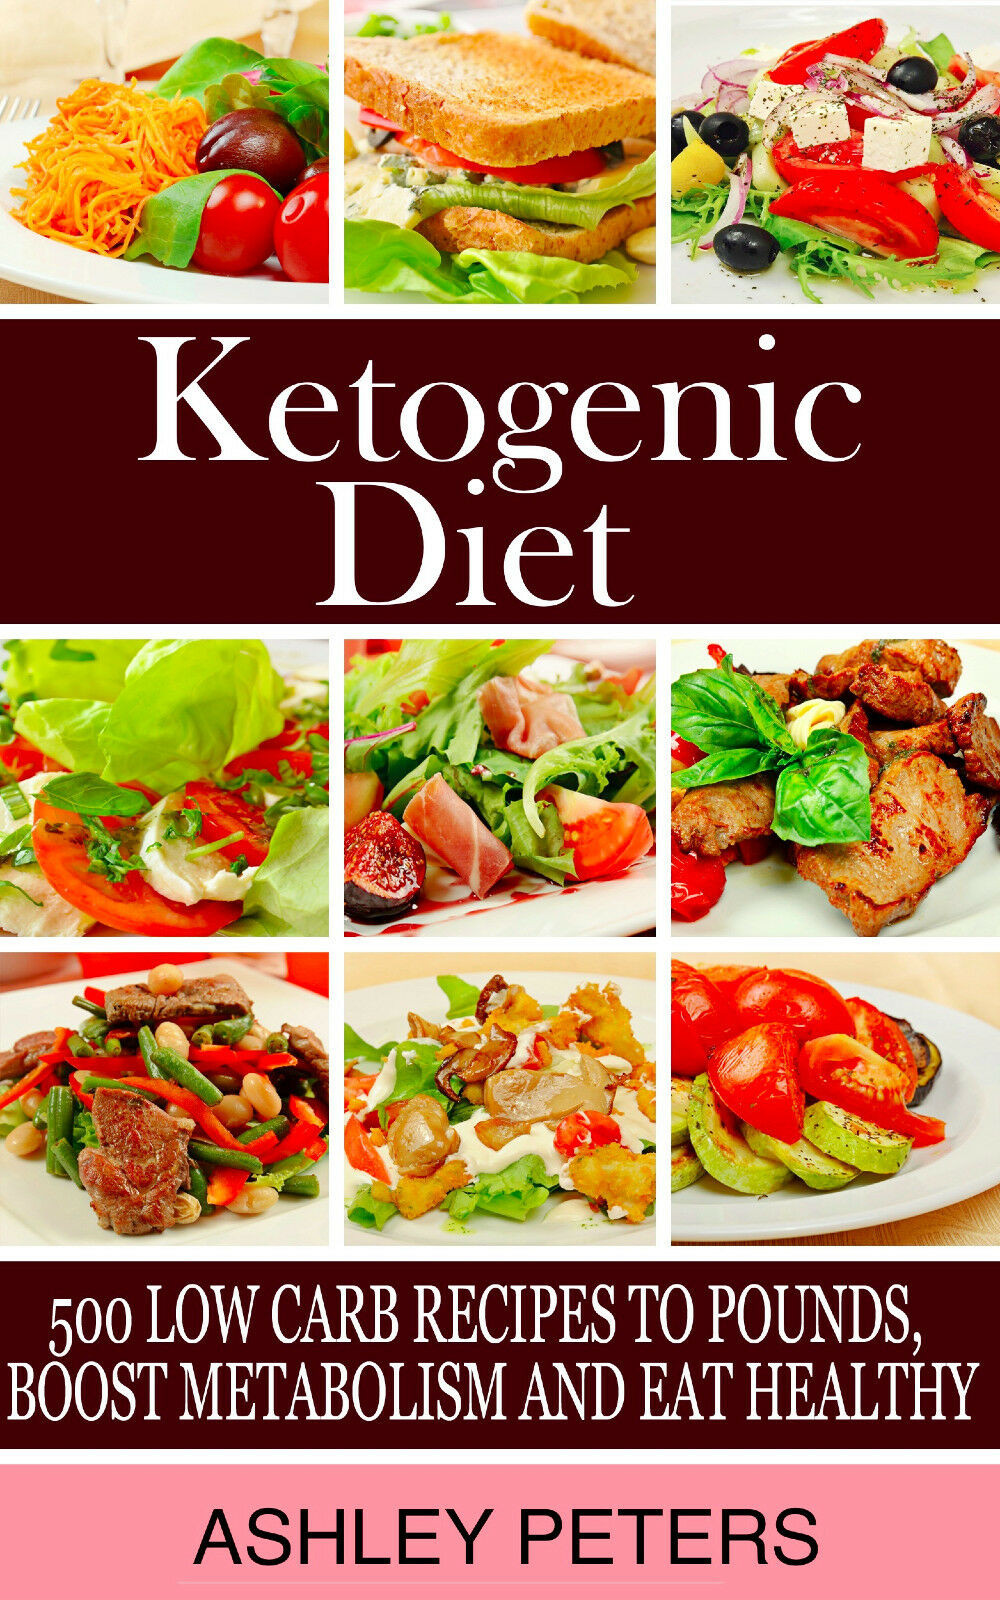 Low Carb Keto Ketogenic Diet
 Ketogenic Diet Cookbook 500 Keto Diet Low Carb Recipes